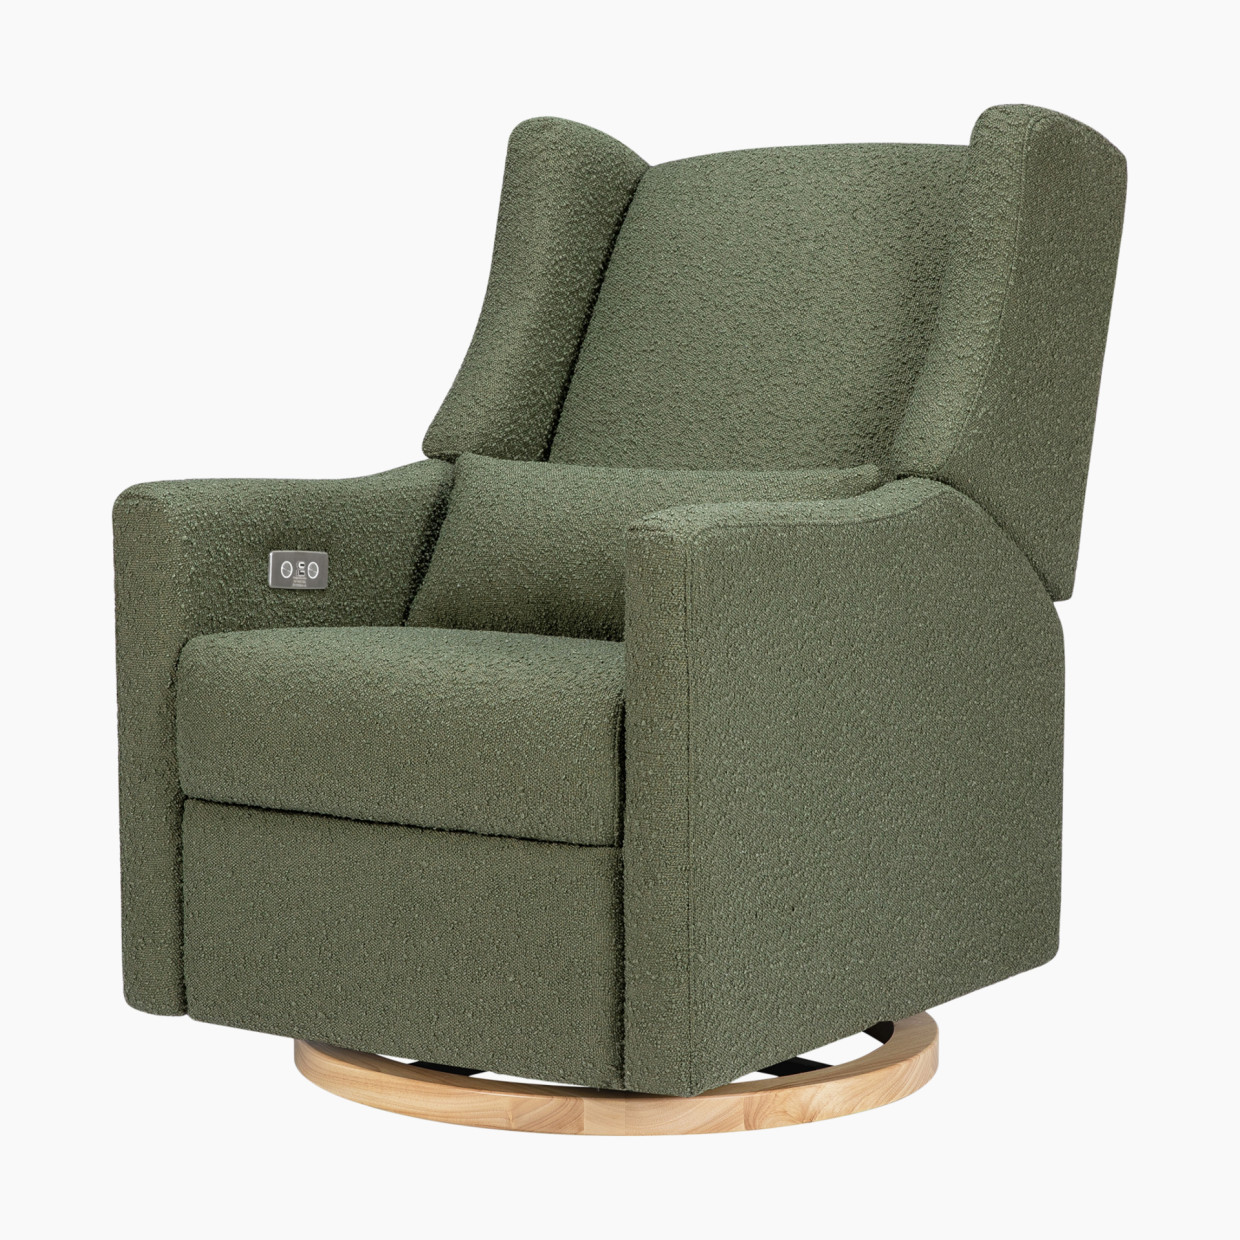 babyletto Kiwi Electronic Recliner and Swivel Glider - Olive Boucle With Light Base.